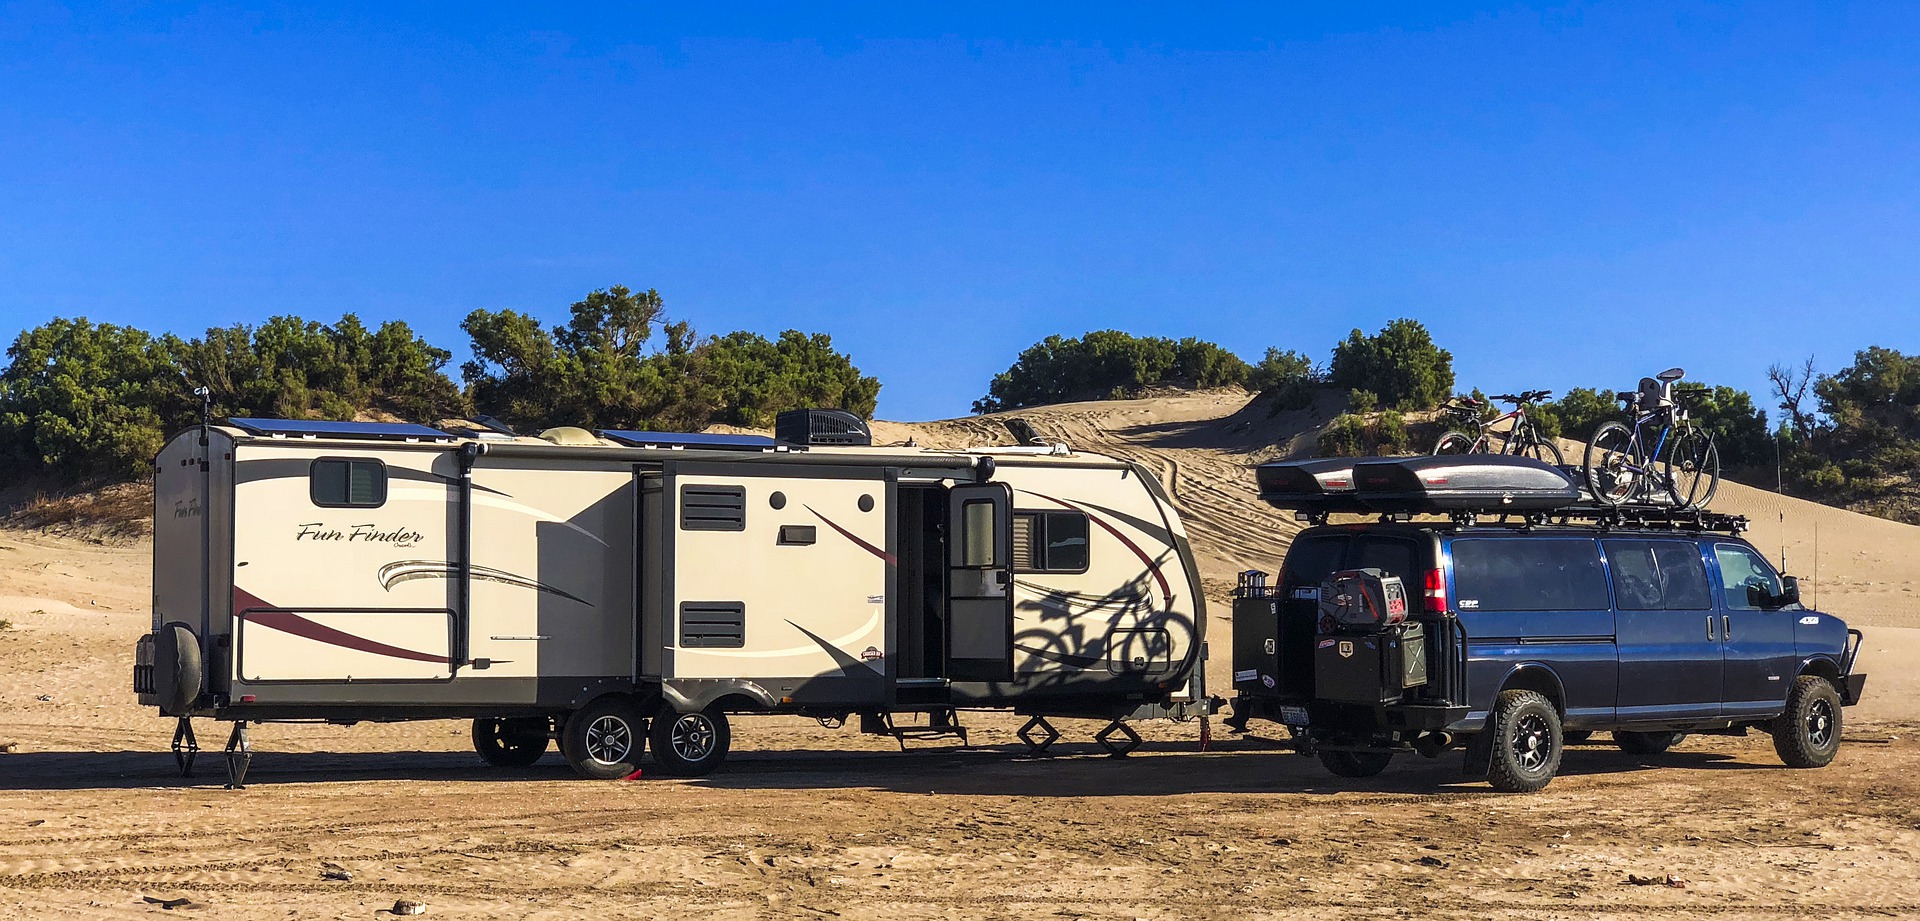 Episode 73 — The RV Industry in 2019 and Food Budgets for Full-Time RV Travel